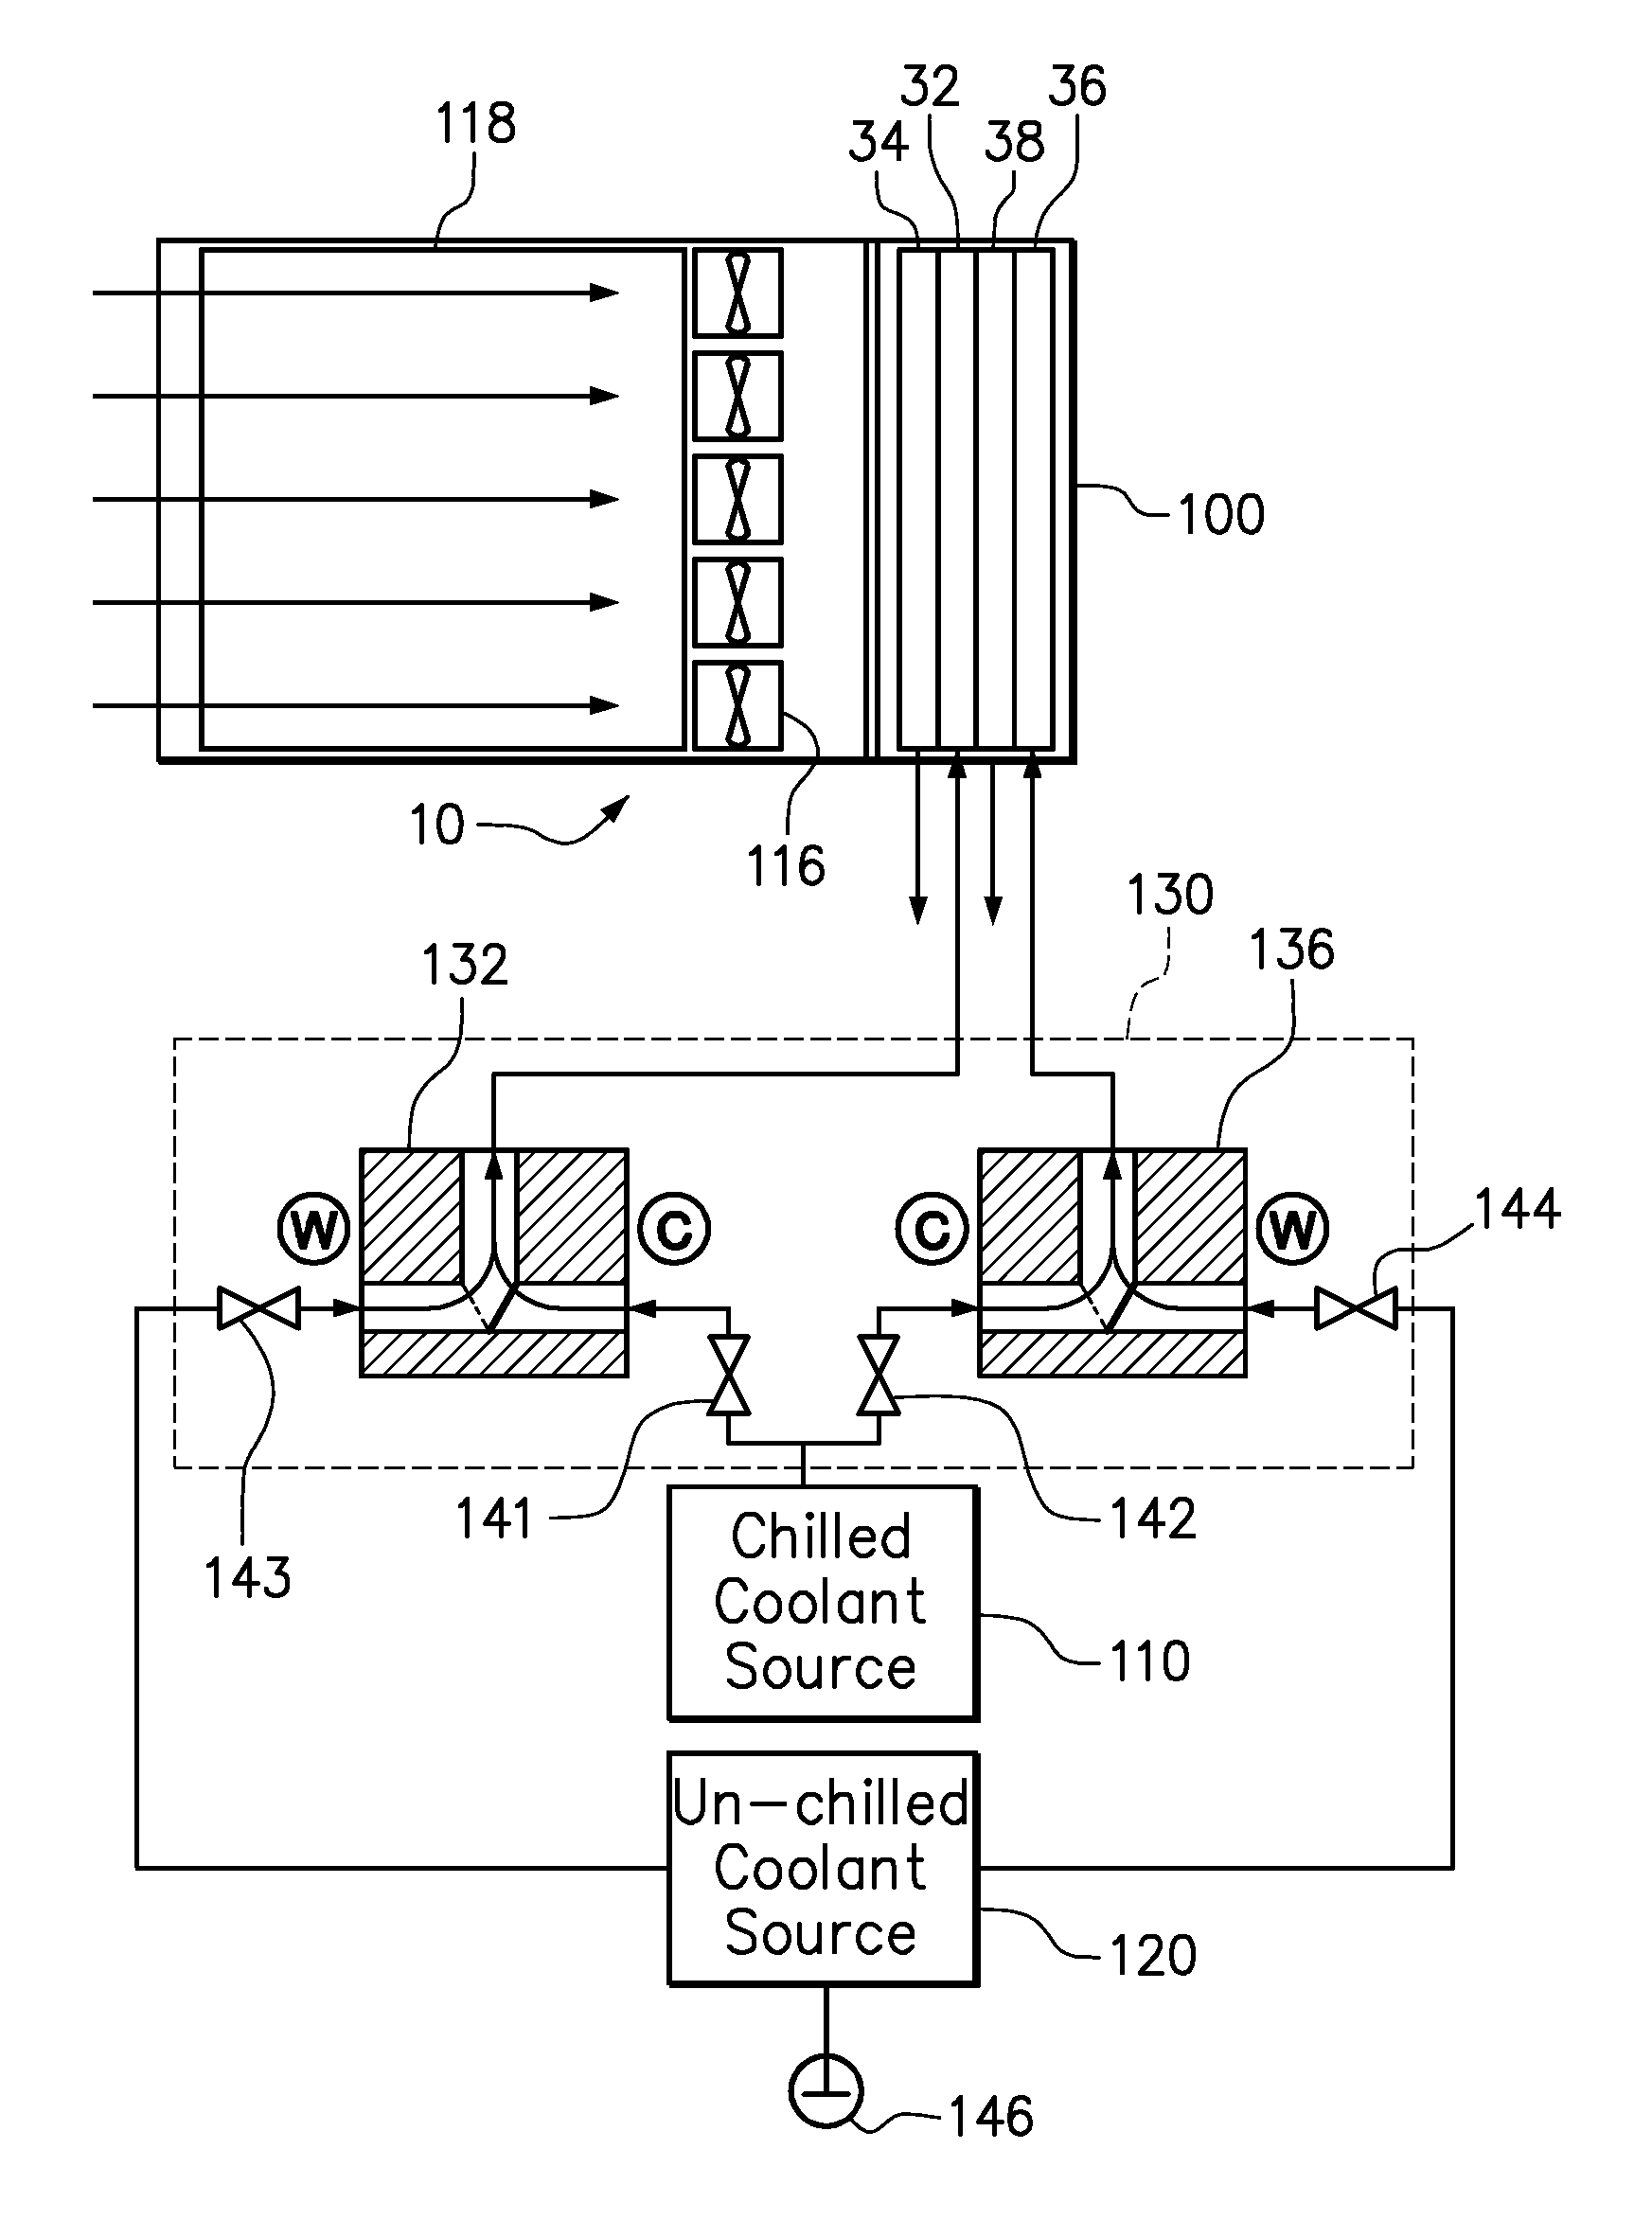 Computer rack cooling using independently-controlled flow of coolants through a dual-section heat exchanger